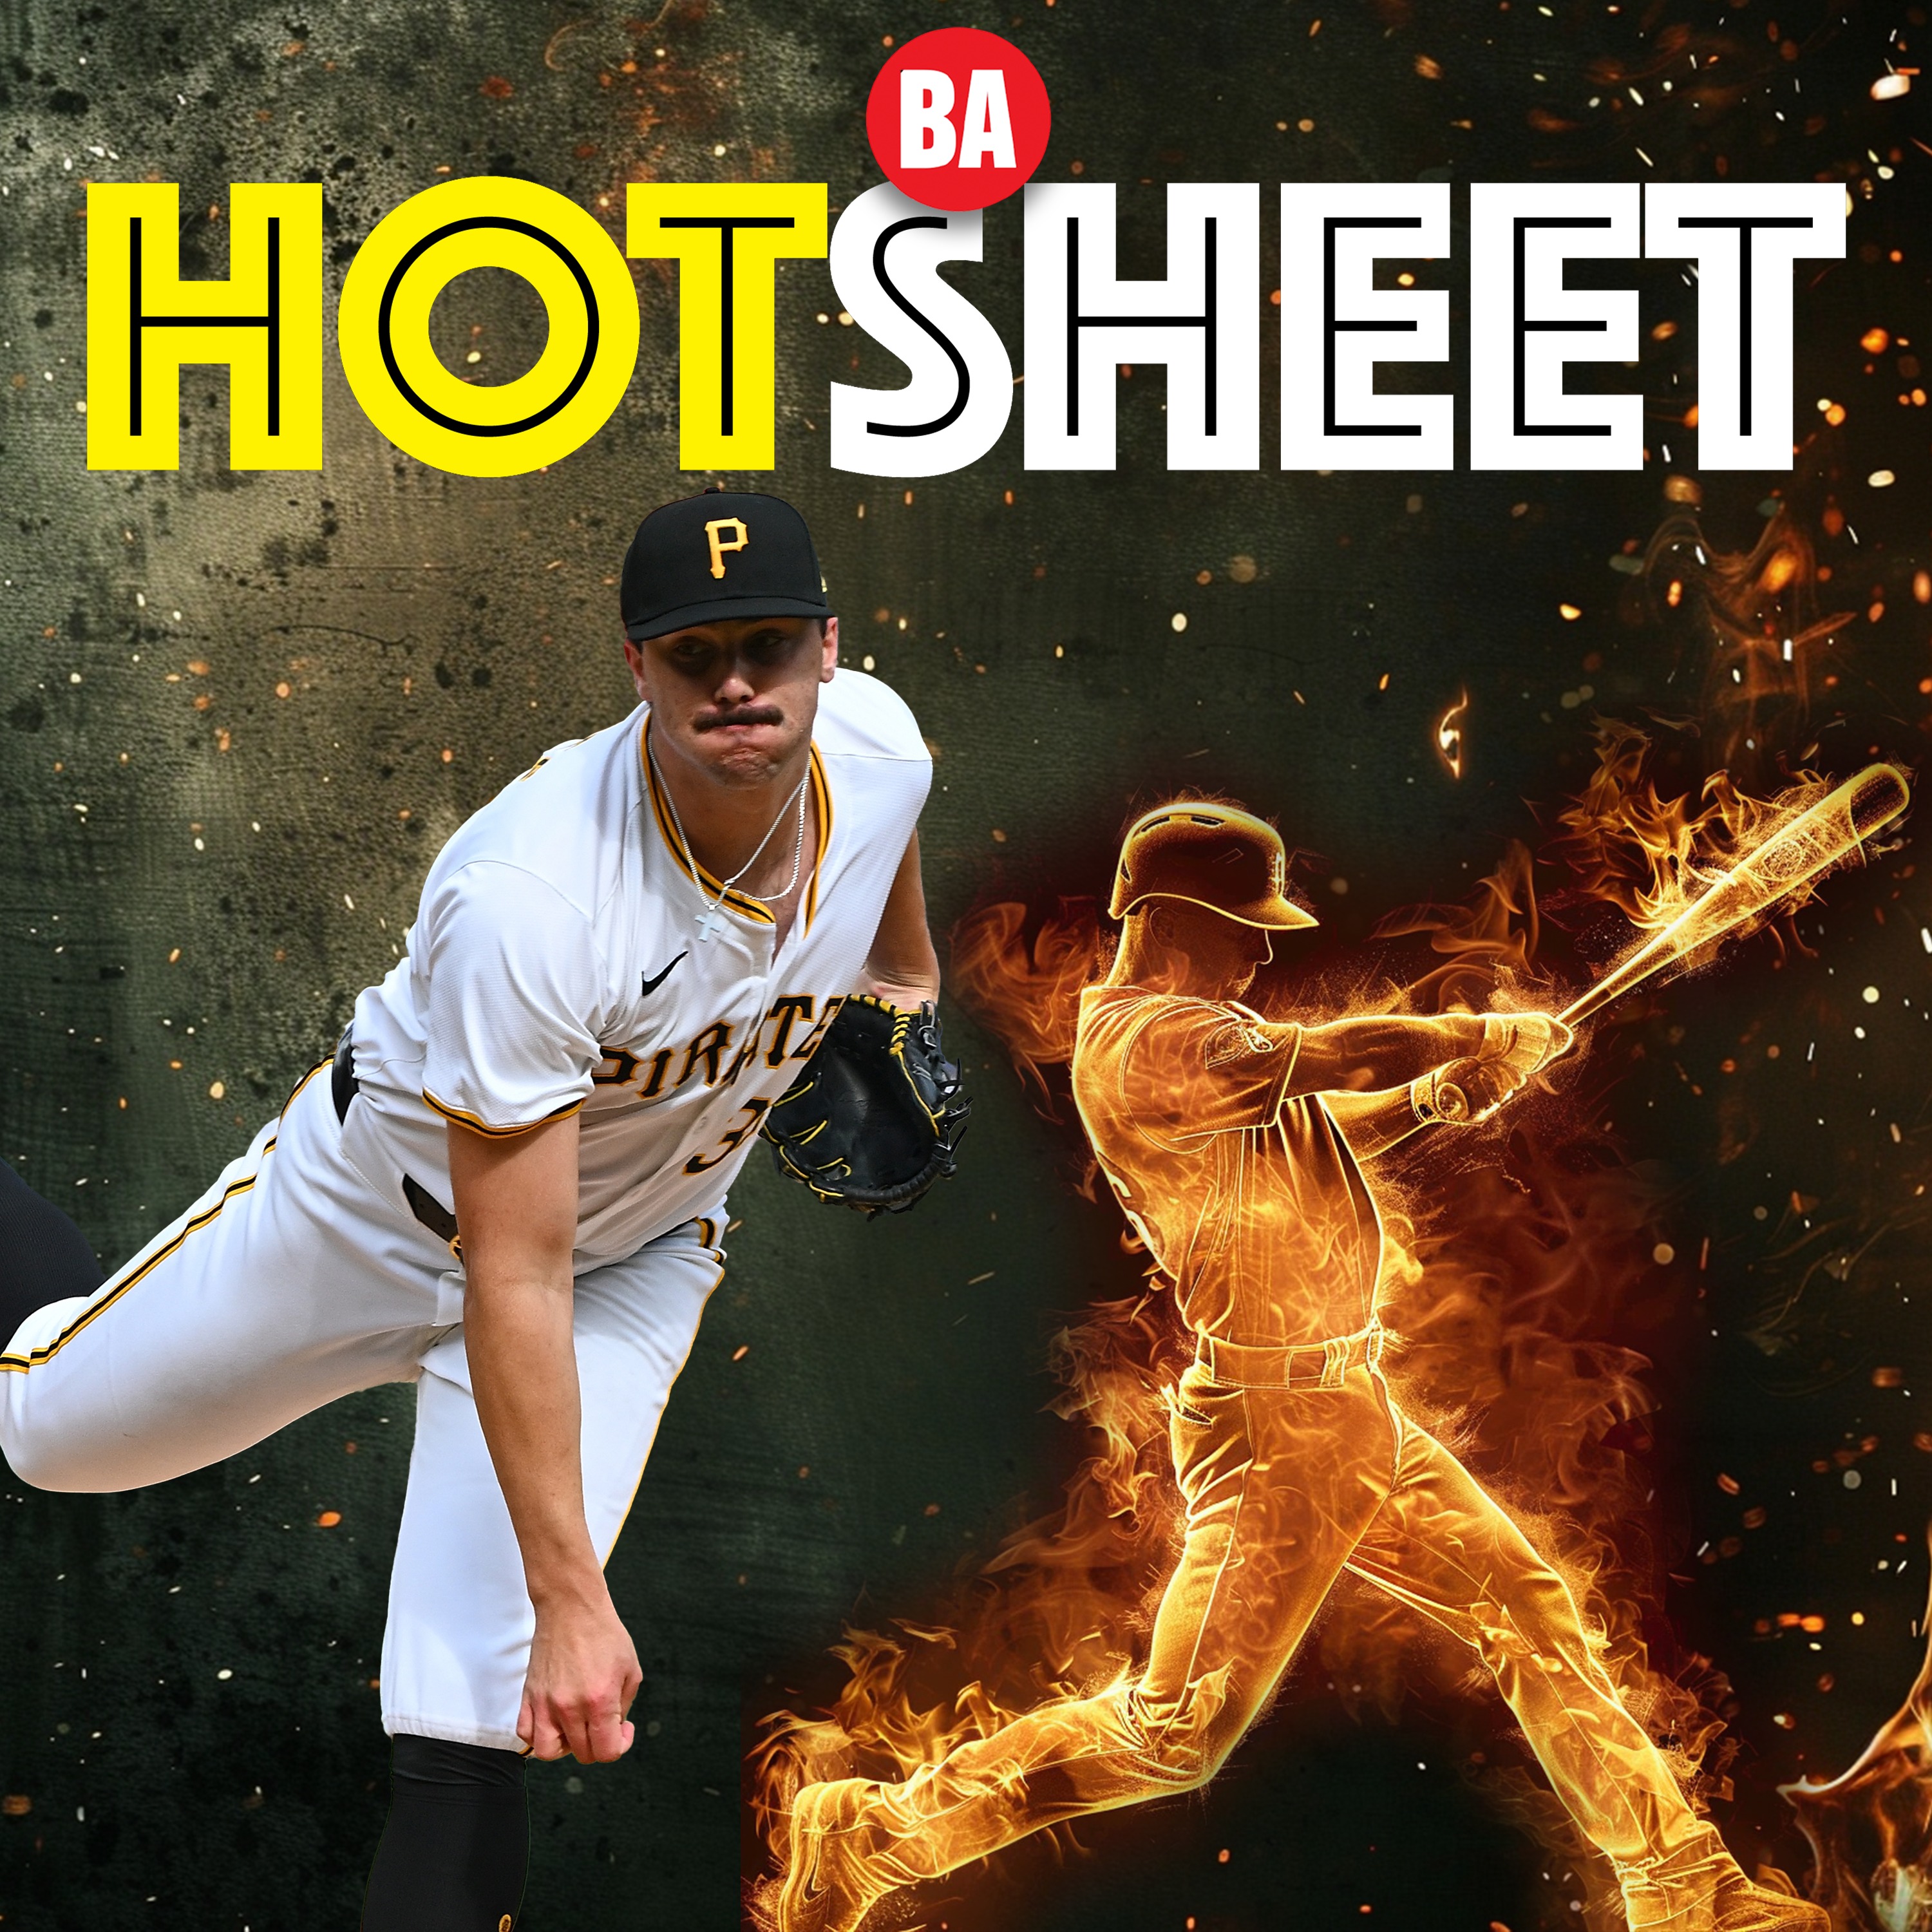 Taking Stock Of Pirates Player Development After Paul Skenes' Debut | Hot Sheet Show Ep. 7